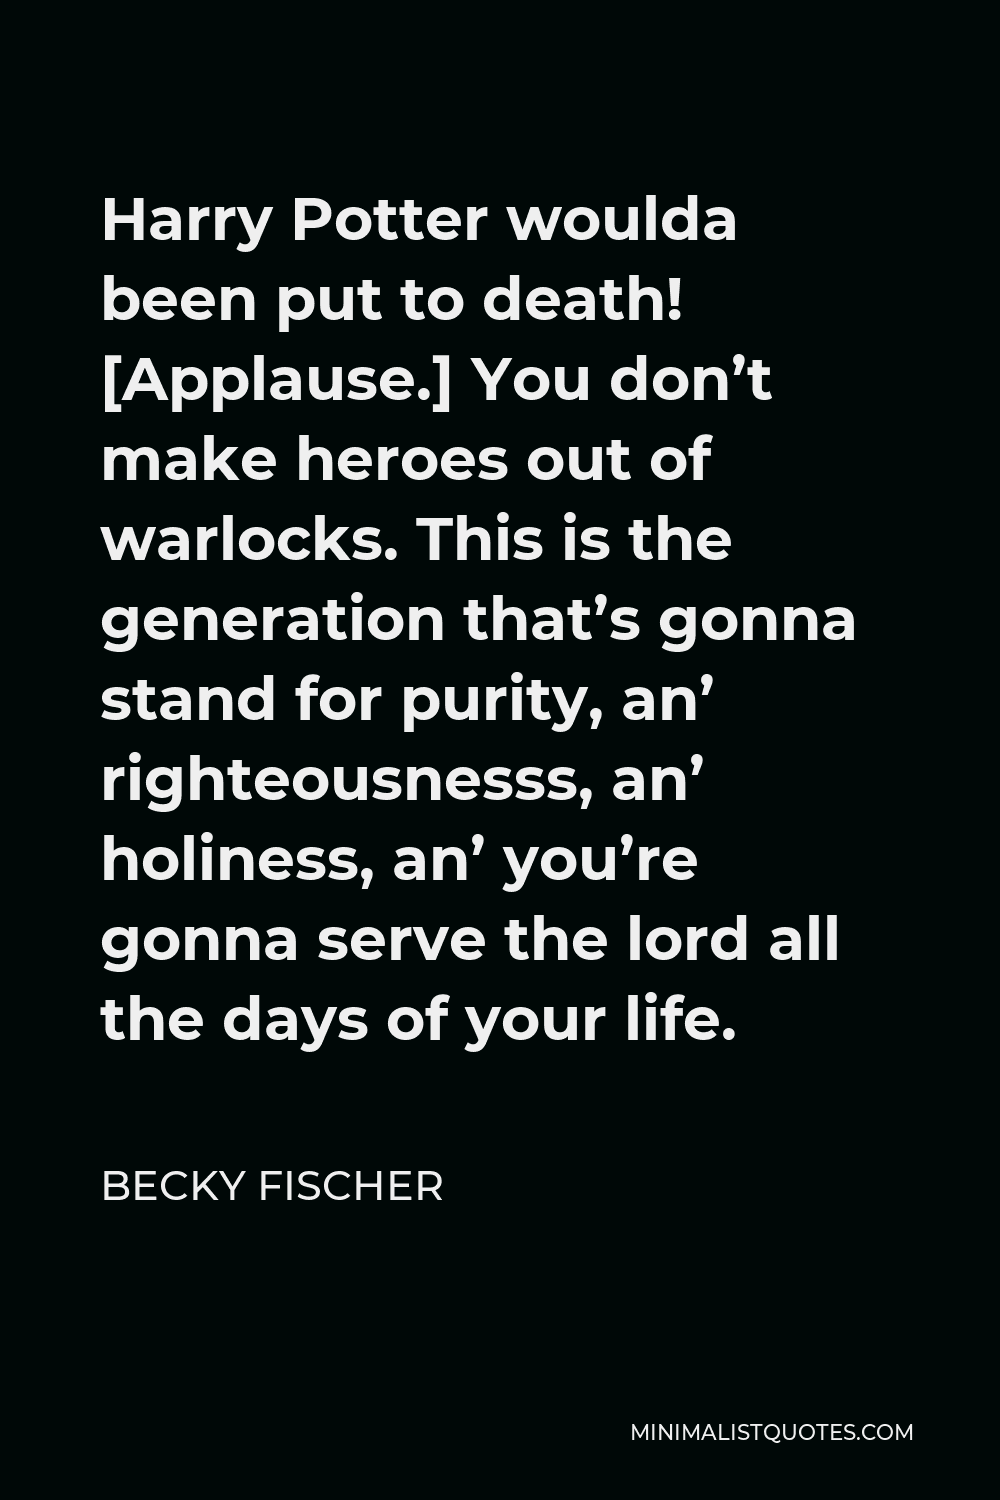 Becky Fischer Quote - Harry Potter woulda been put to death! [Applause.] You don’t make heroes out of warlocks. This is the generation that’s gonna stand for purity, an’ righteousnesss, an’ holiness, an’ you’re gonna serve the lord all the days of your life.